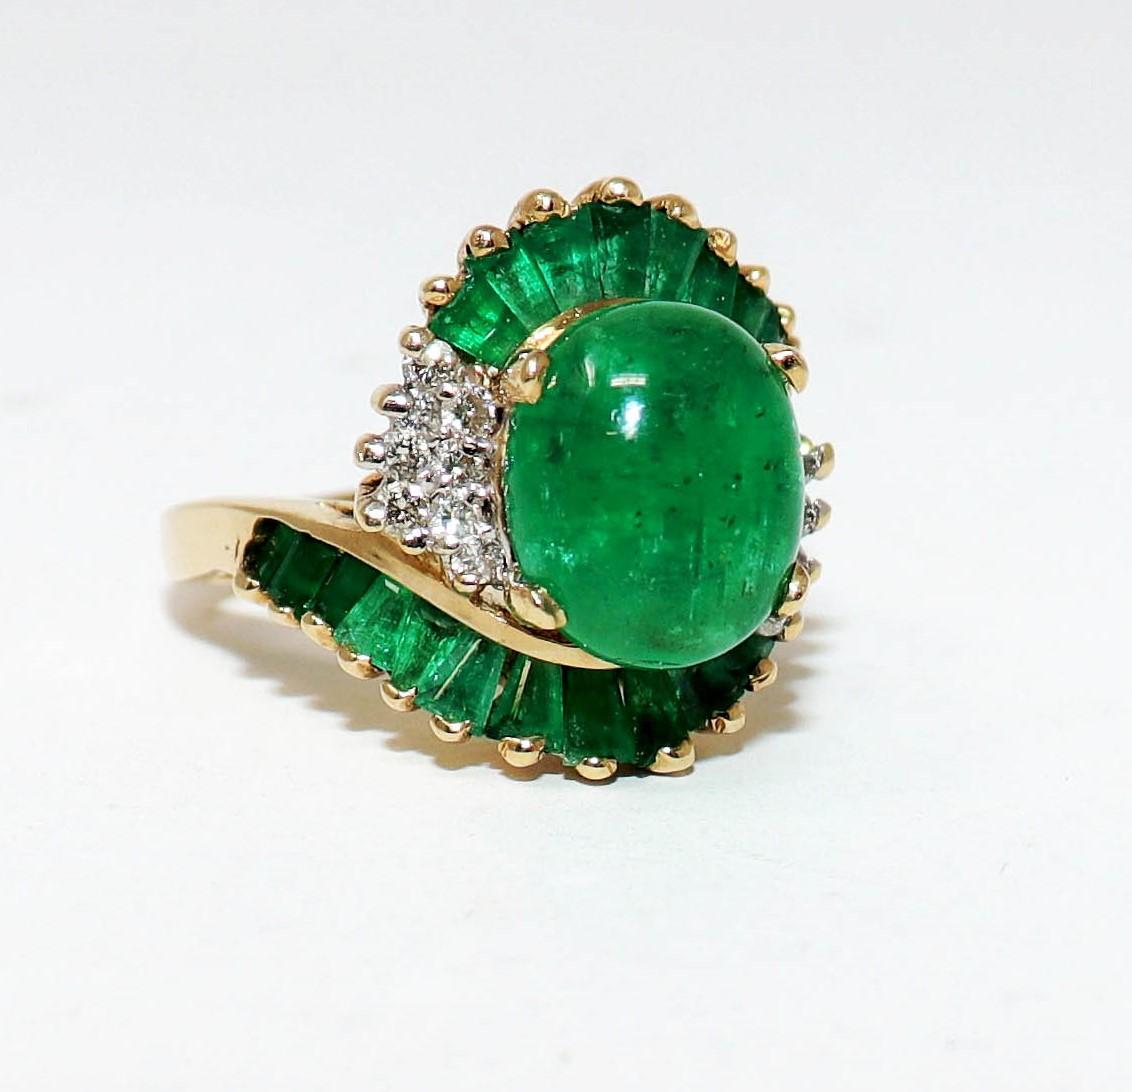 Ring size: 7.5

Bold and breathtaking, this ring has a stunning swirled design that brings elegant movement and big sparkle to the finger. 

Gorgeous piece features a stunning 4.75 carat oval cabochon cut Natural Emerald prong set as the centerpiece